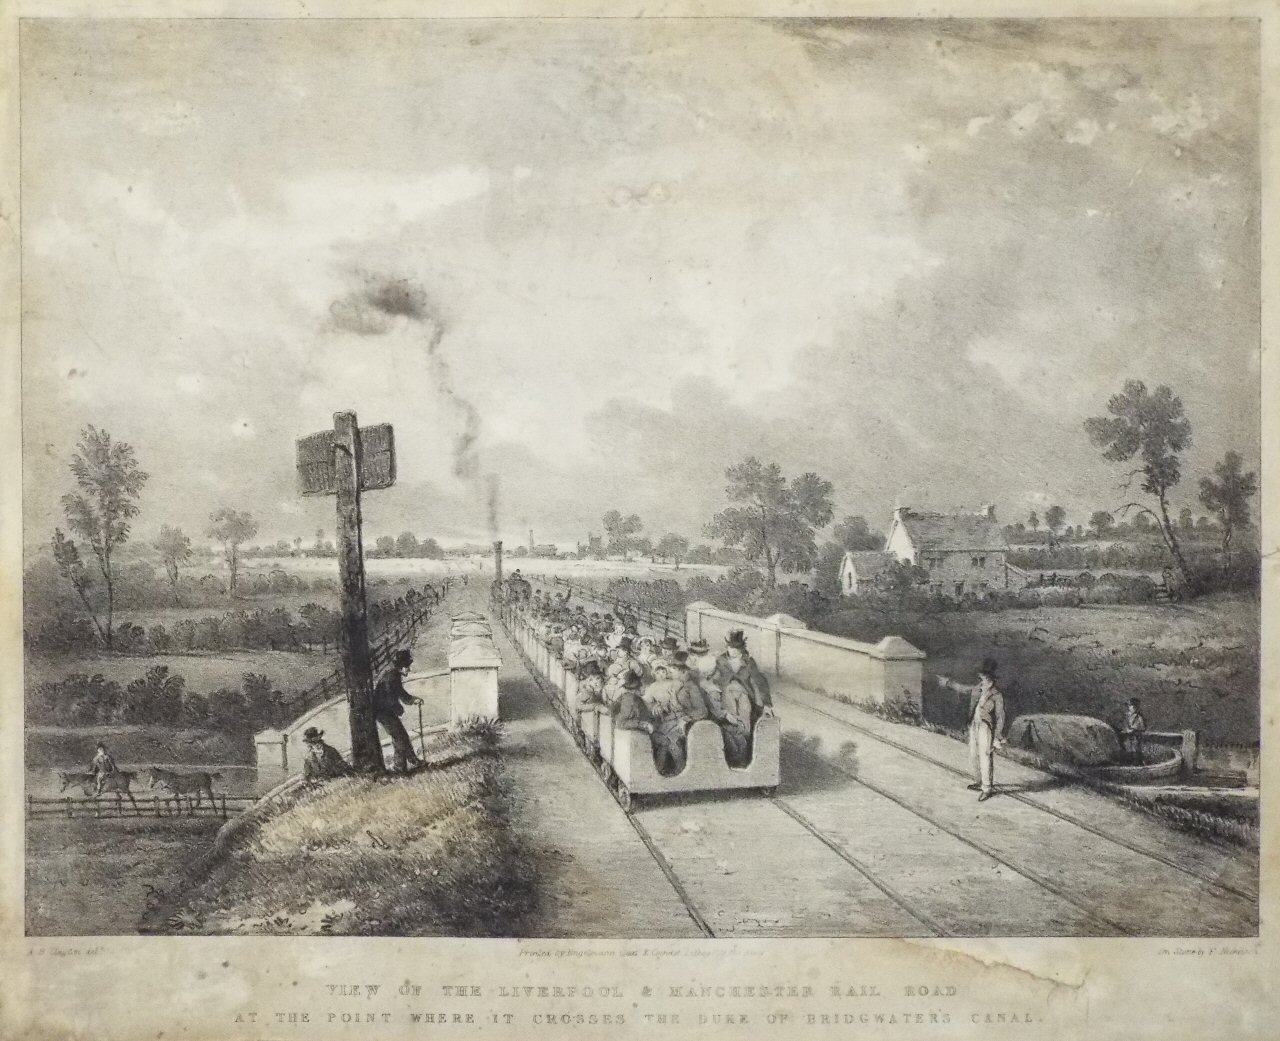 Lithograph - View of the Liverpool & Manchester Rail Road at the Point where it crosses the Duke of Bridgwater's Canal